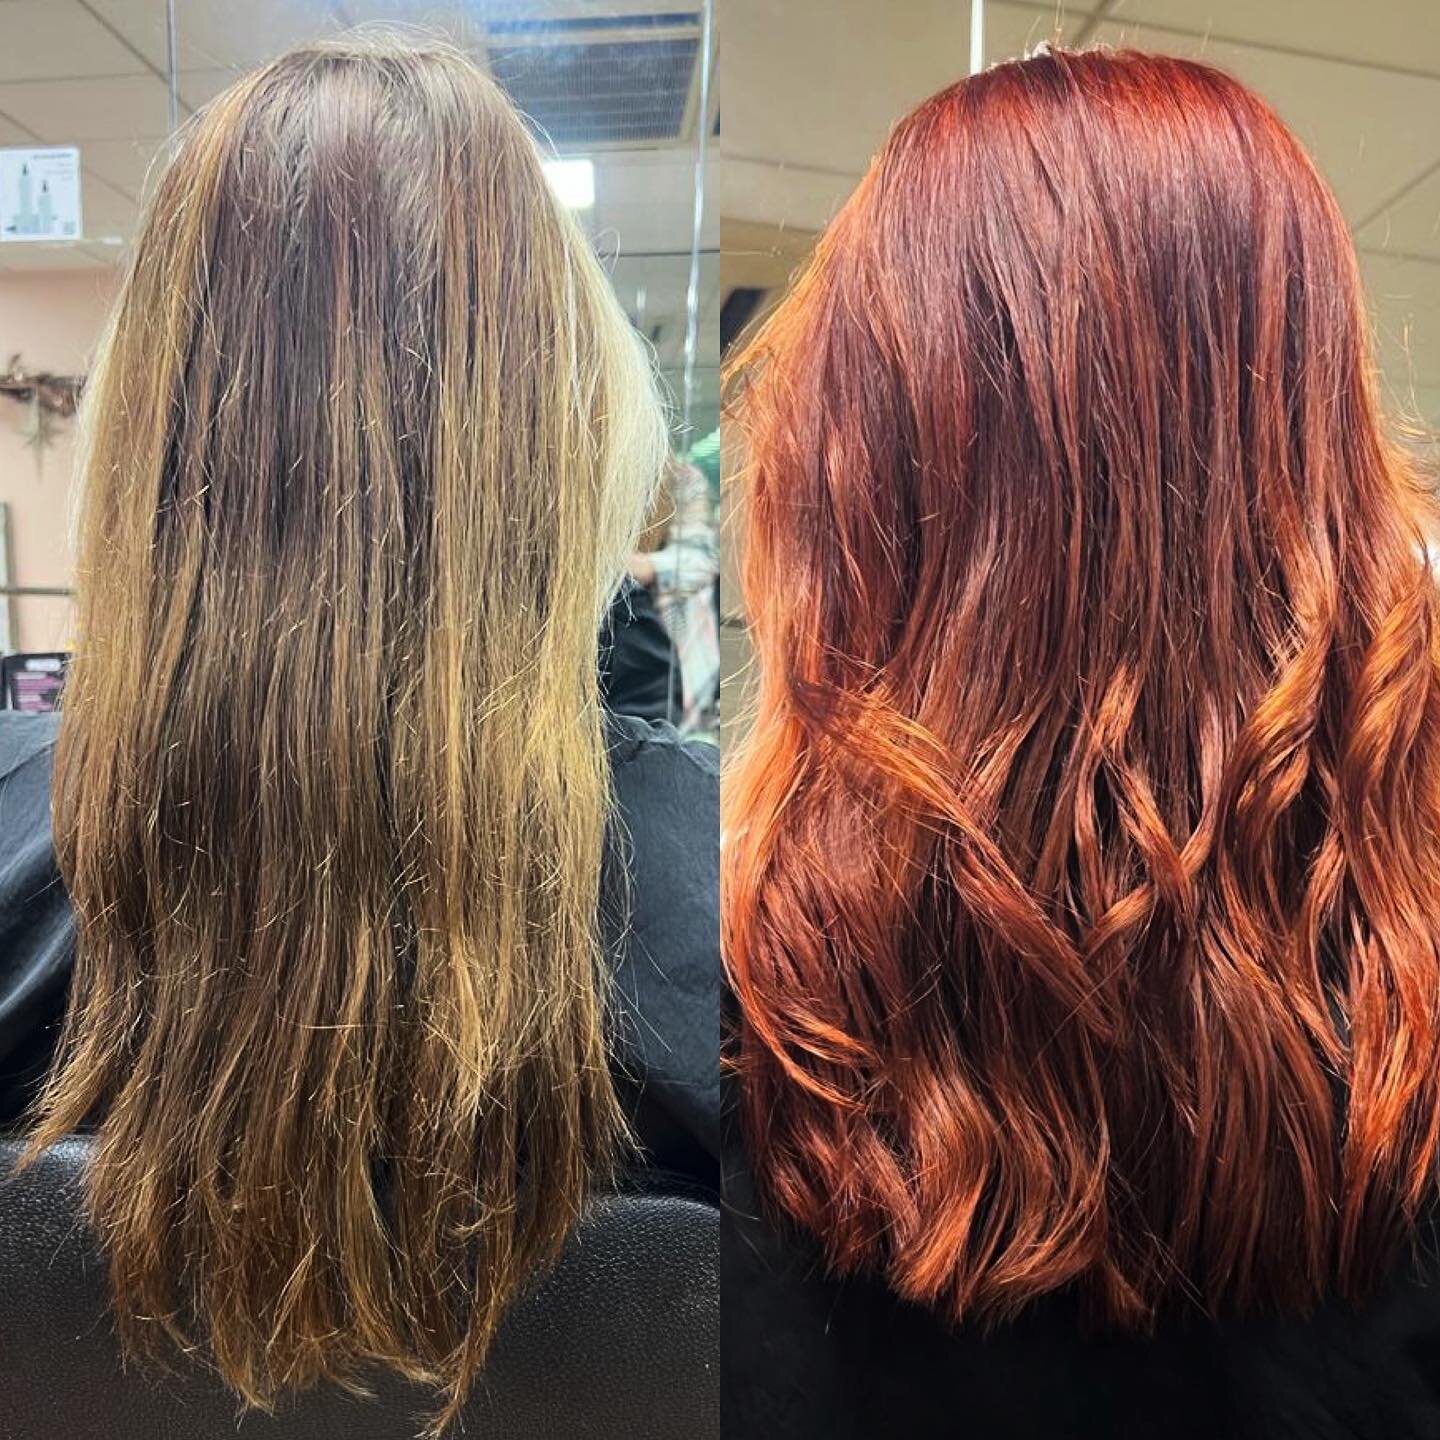 New Year - New Colour!  #colormebykm #kevinmurphycolorme #copperhair #copperredhair #redhairdontcare #colourchange #kevinmurphyproducts #bournemouthhair #bournemouthhairdresser #bournemouthhairsalon